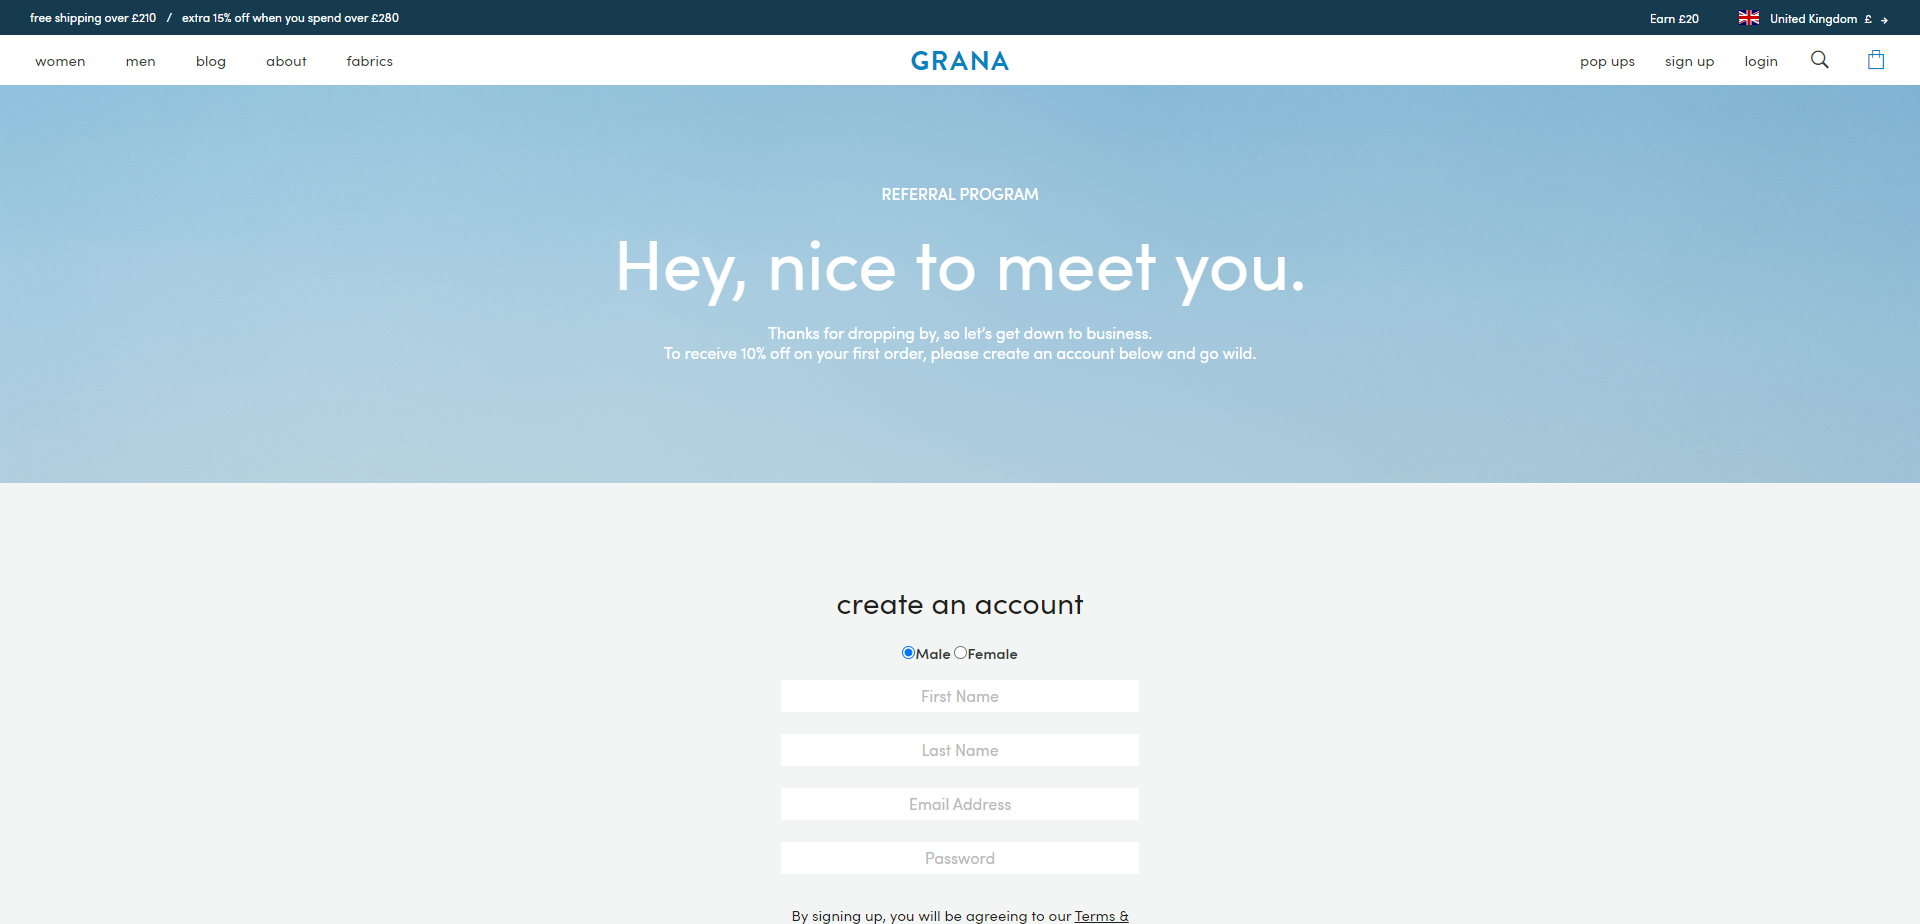 Referral Landing Page for Grana